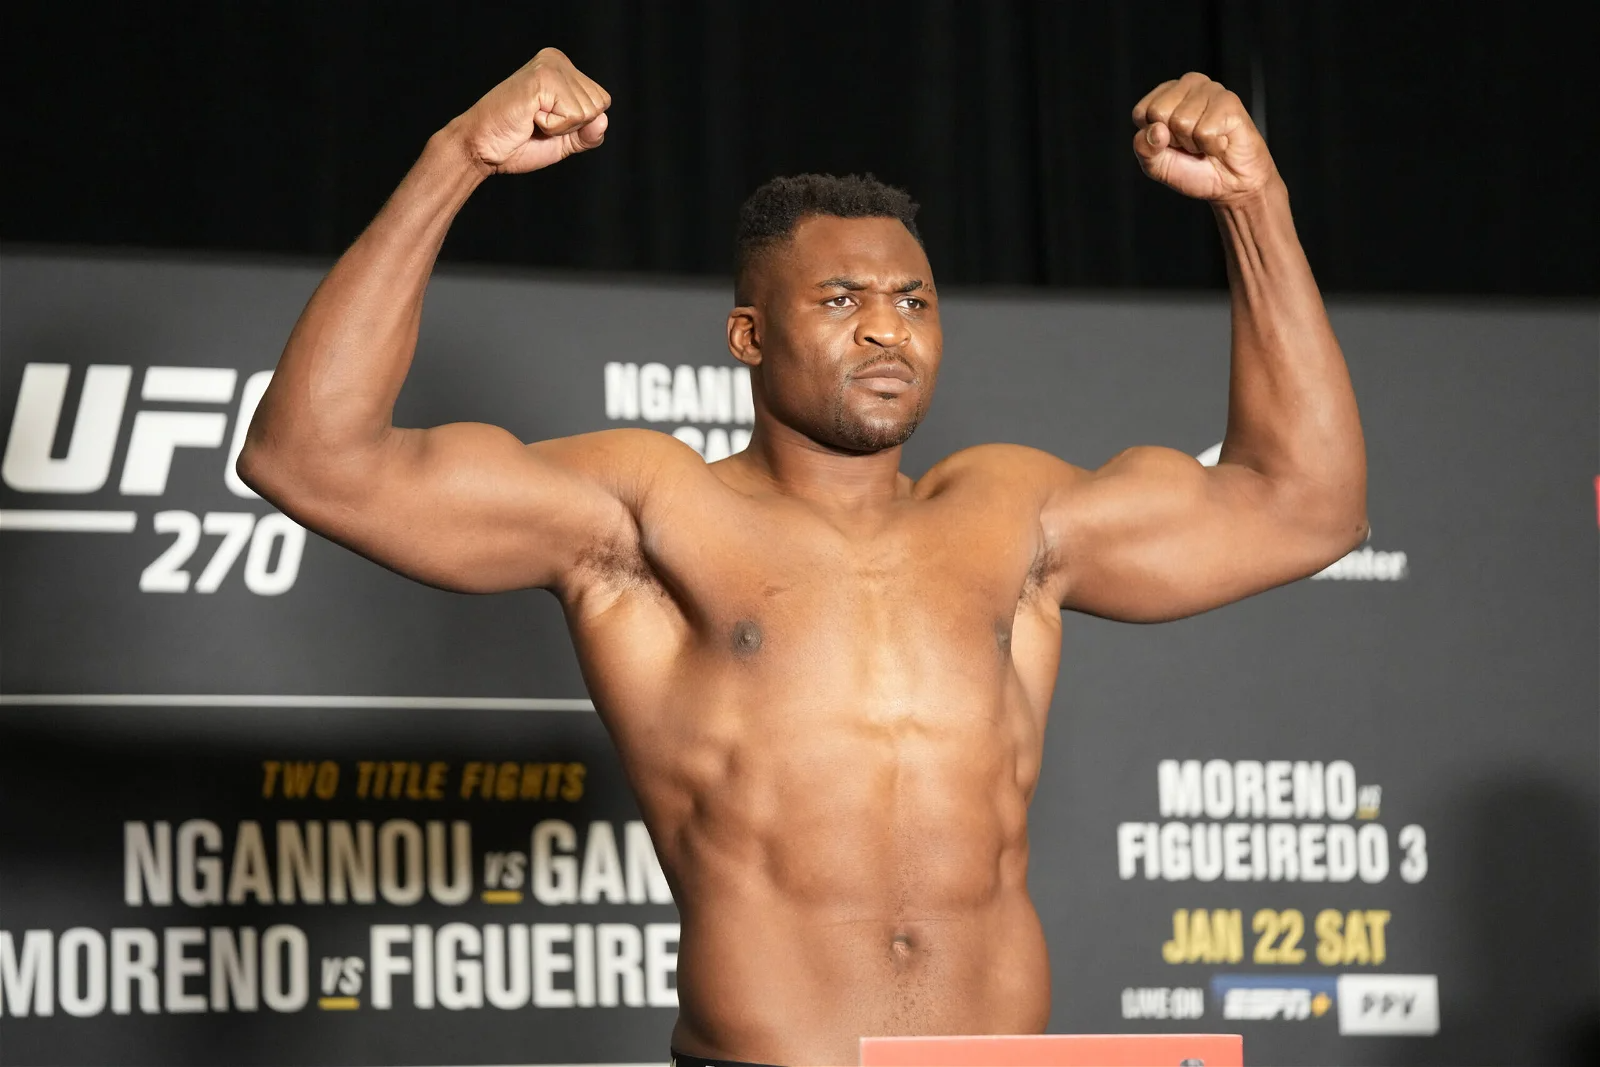 ONE terminates negotiations with Ngannou